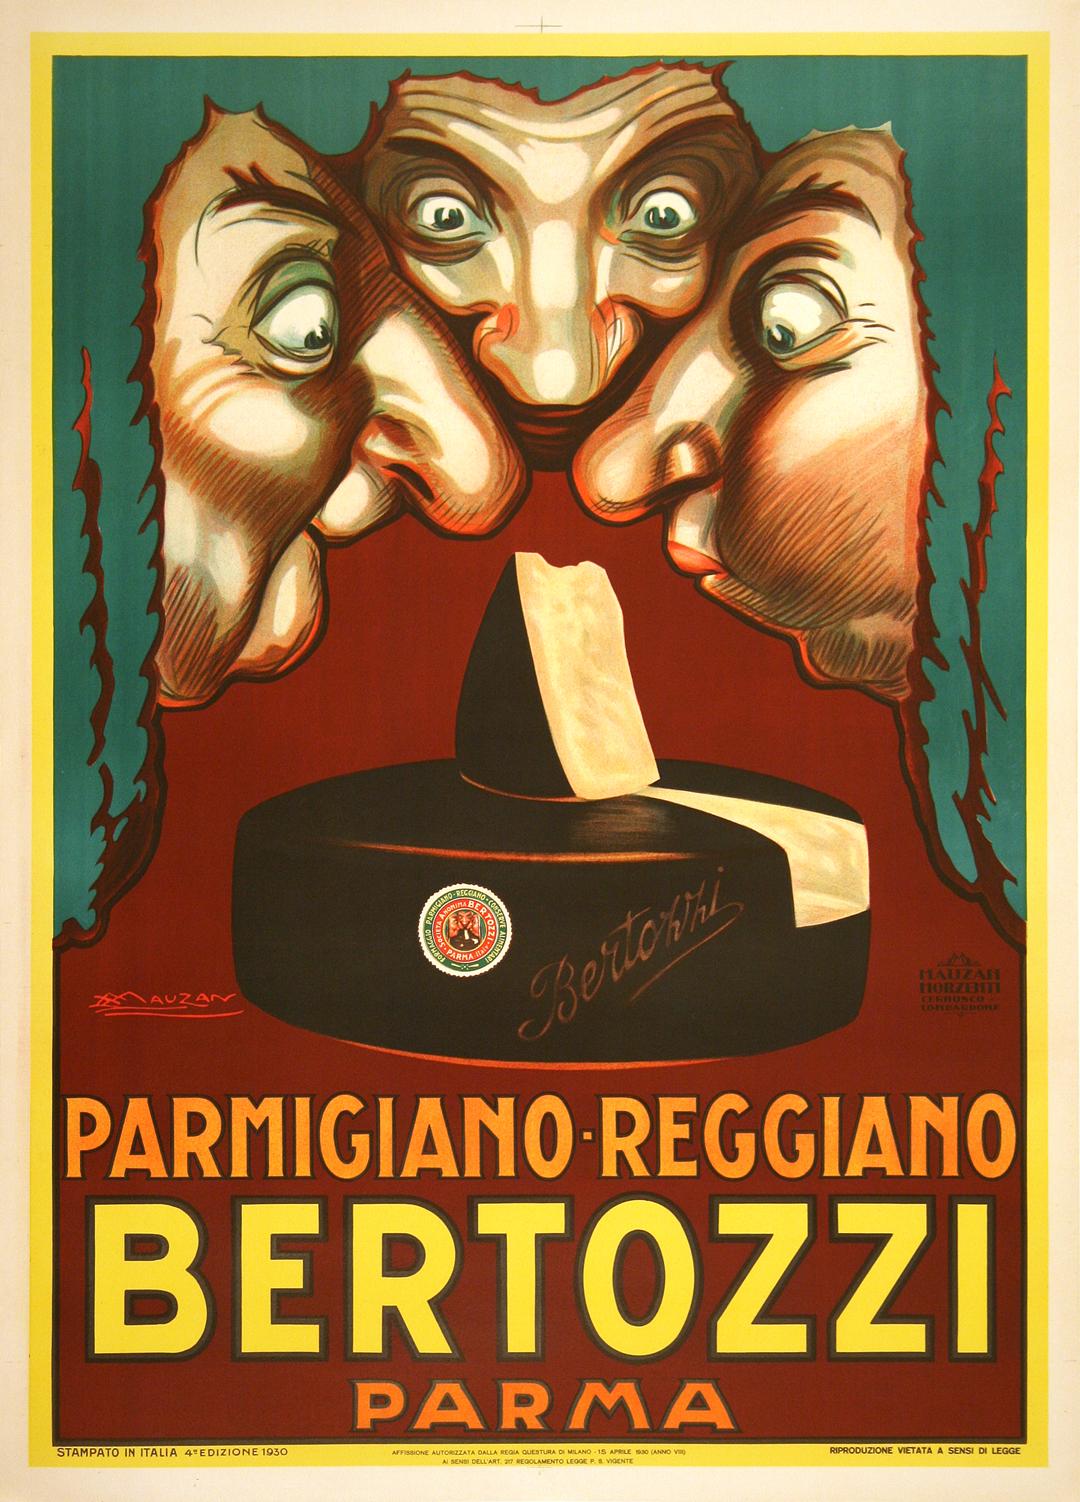 Achille Mauzan created this vintage poster in 1924 to advertise the Bertozzi brand of cheeses. Three judges with expressive faces lean over the cheese, giving us a sense of the fragrant and inviting smell of the product. Achille Lucien Mauzan (1883